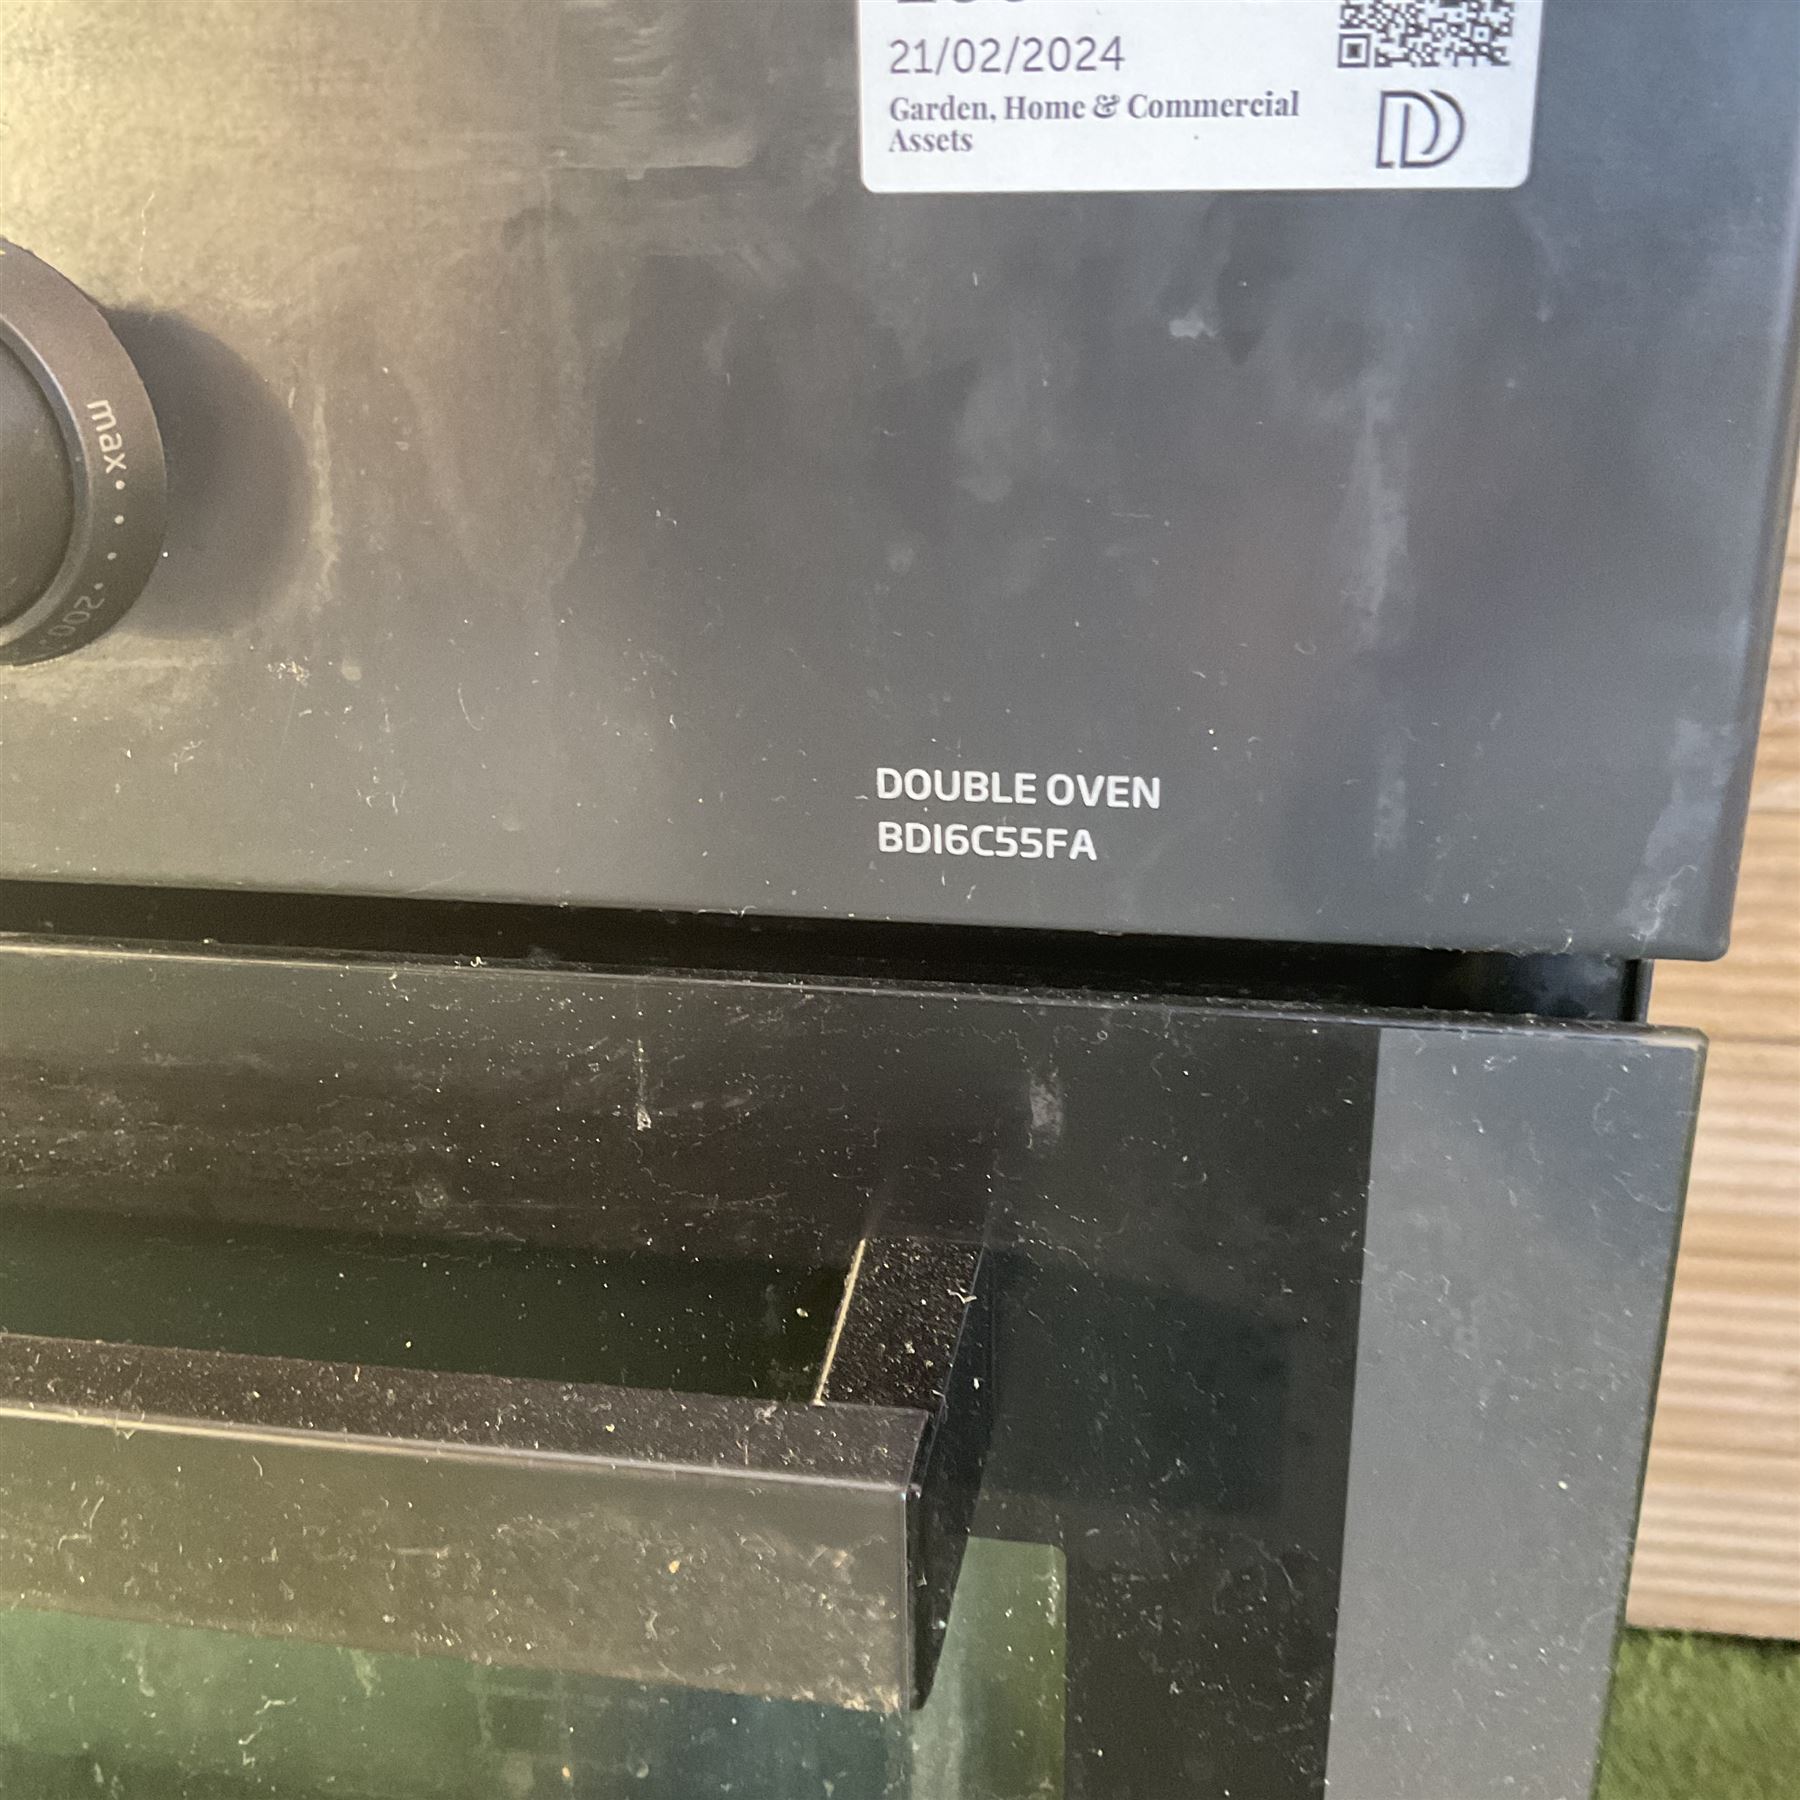 Beko BD16C55FA Double oven black finish domestic cooker - THIS LOT IS TO BE COLLECTED BY APPOINTMEN - Image 2 of 4